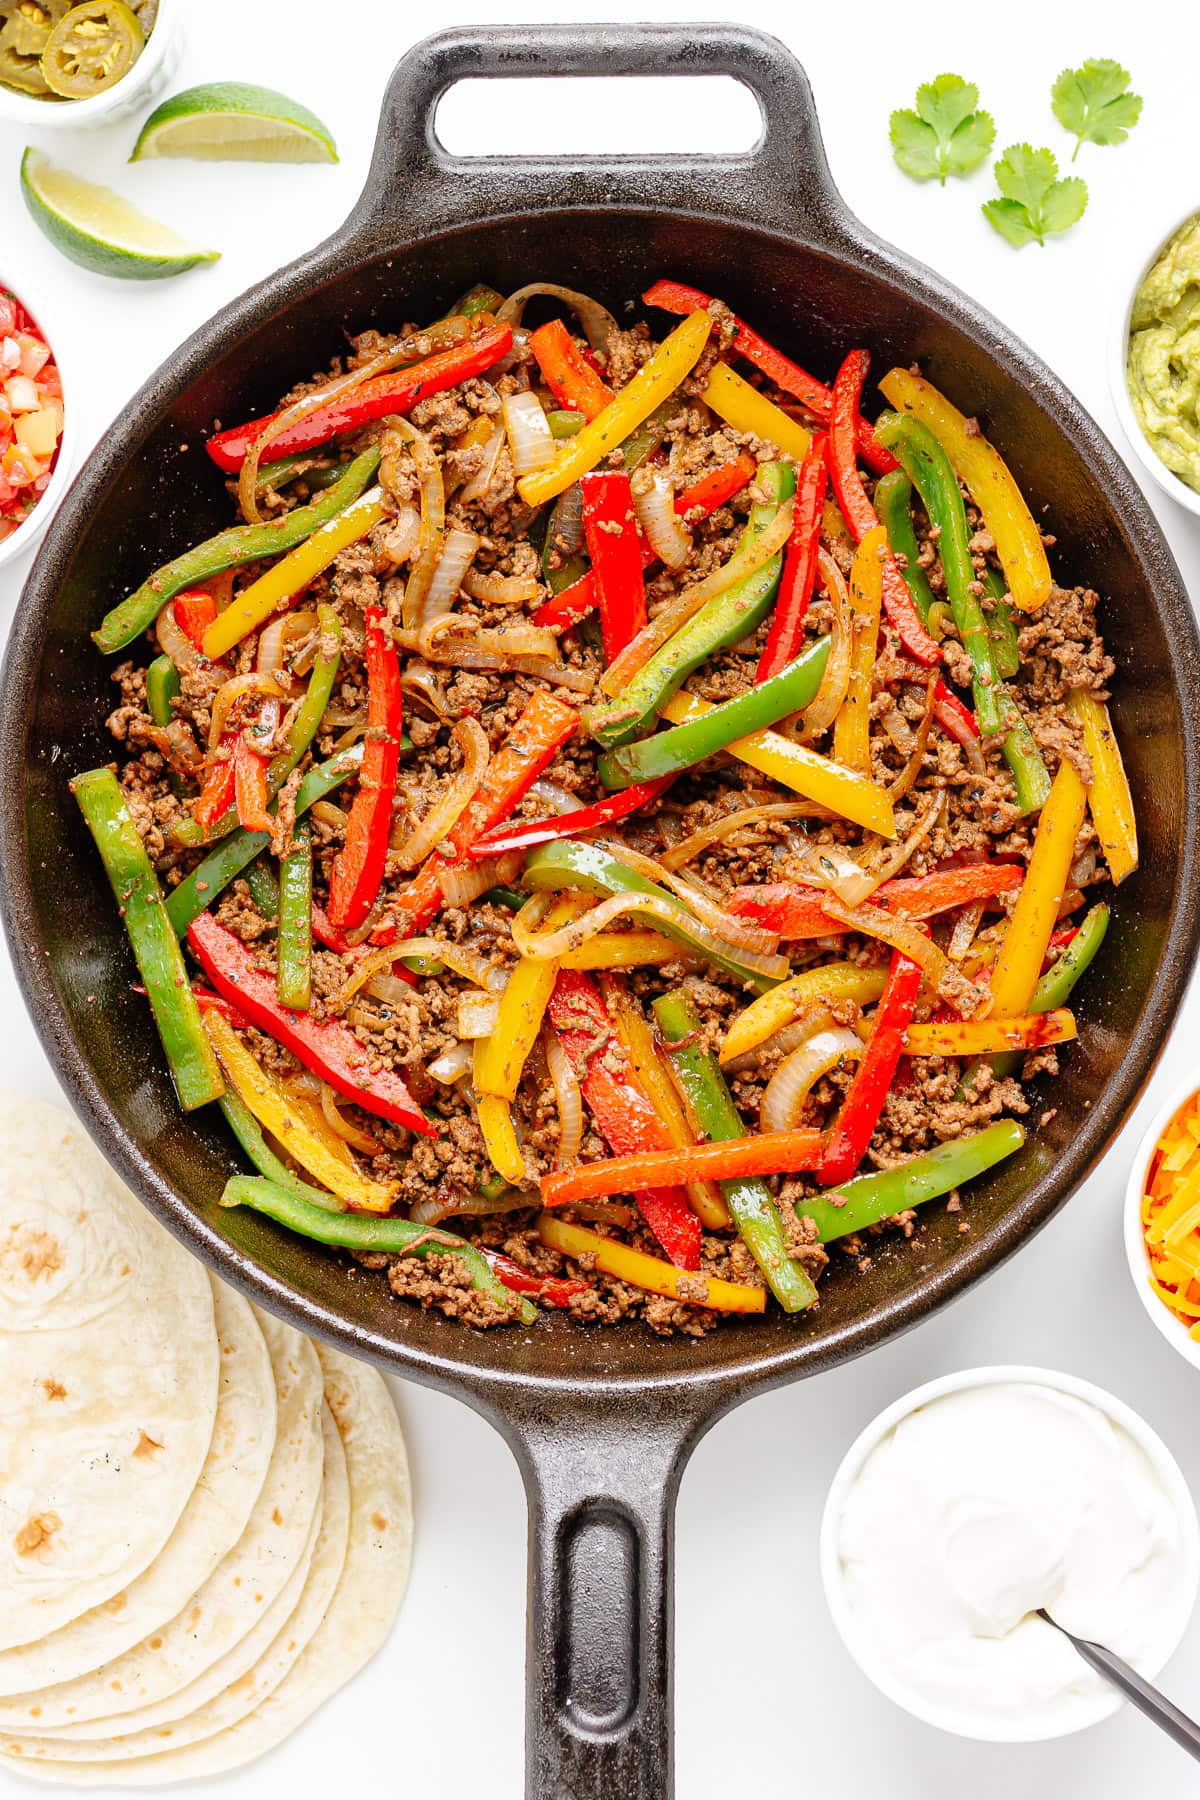 Ground beef and fajita veggie mixture in a cast iron skillet surrounded by tortillas and a variety of fajita toppings.